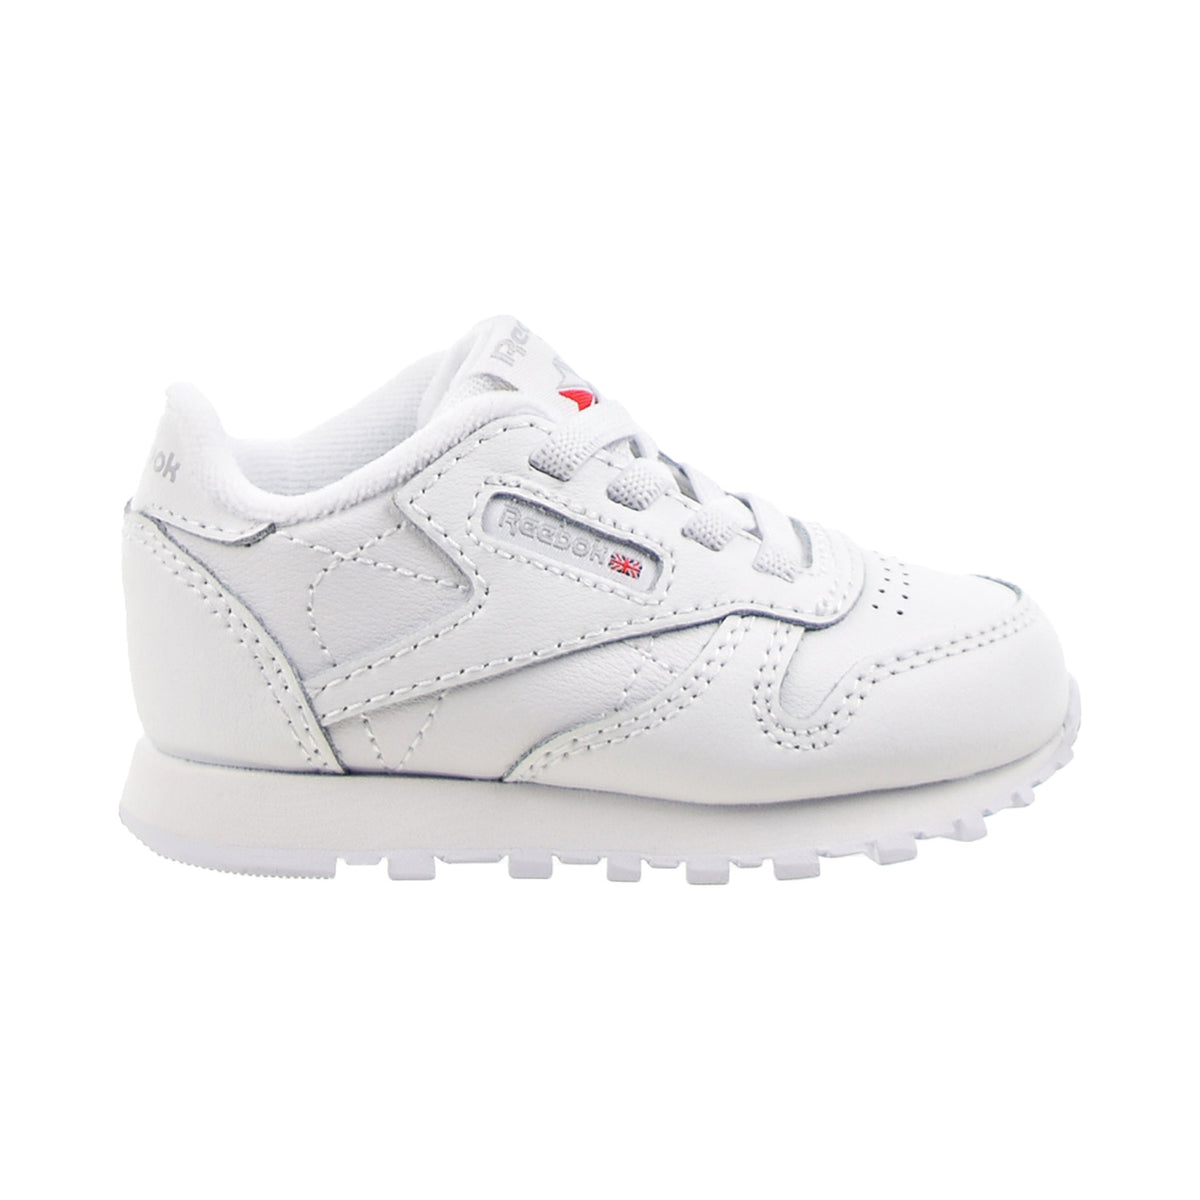 Classic Leather Toddlers Shoes Footwear White